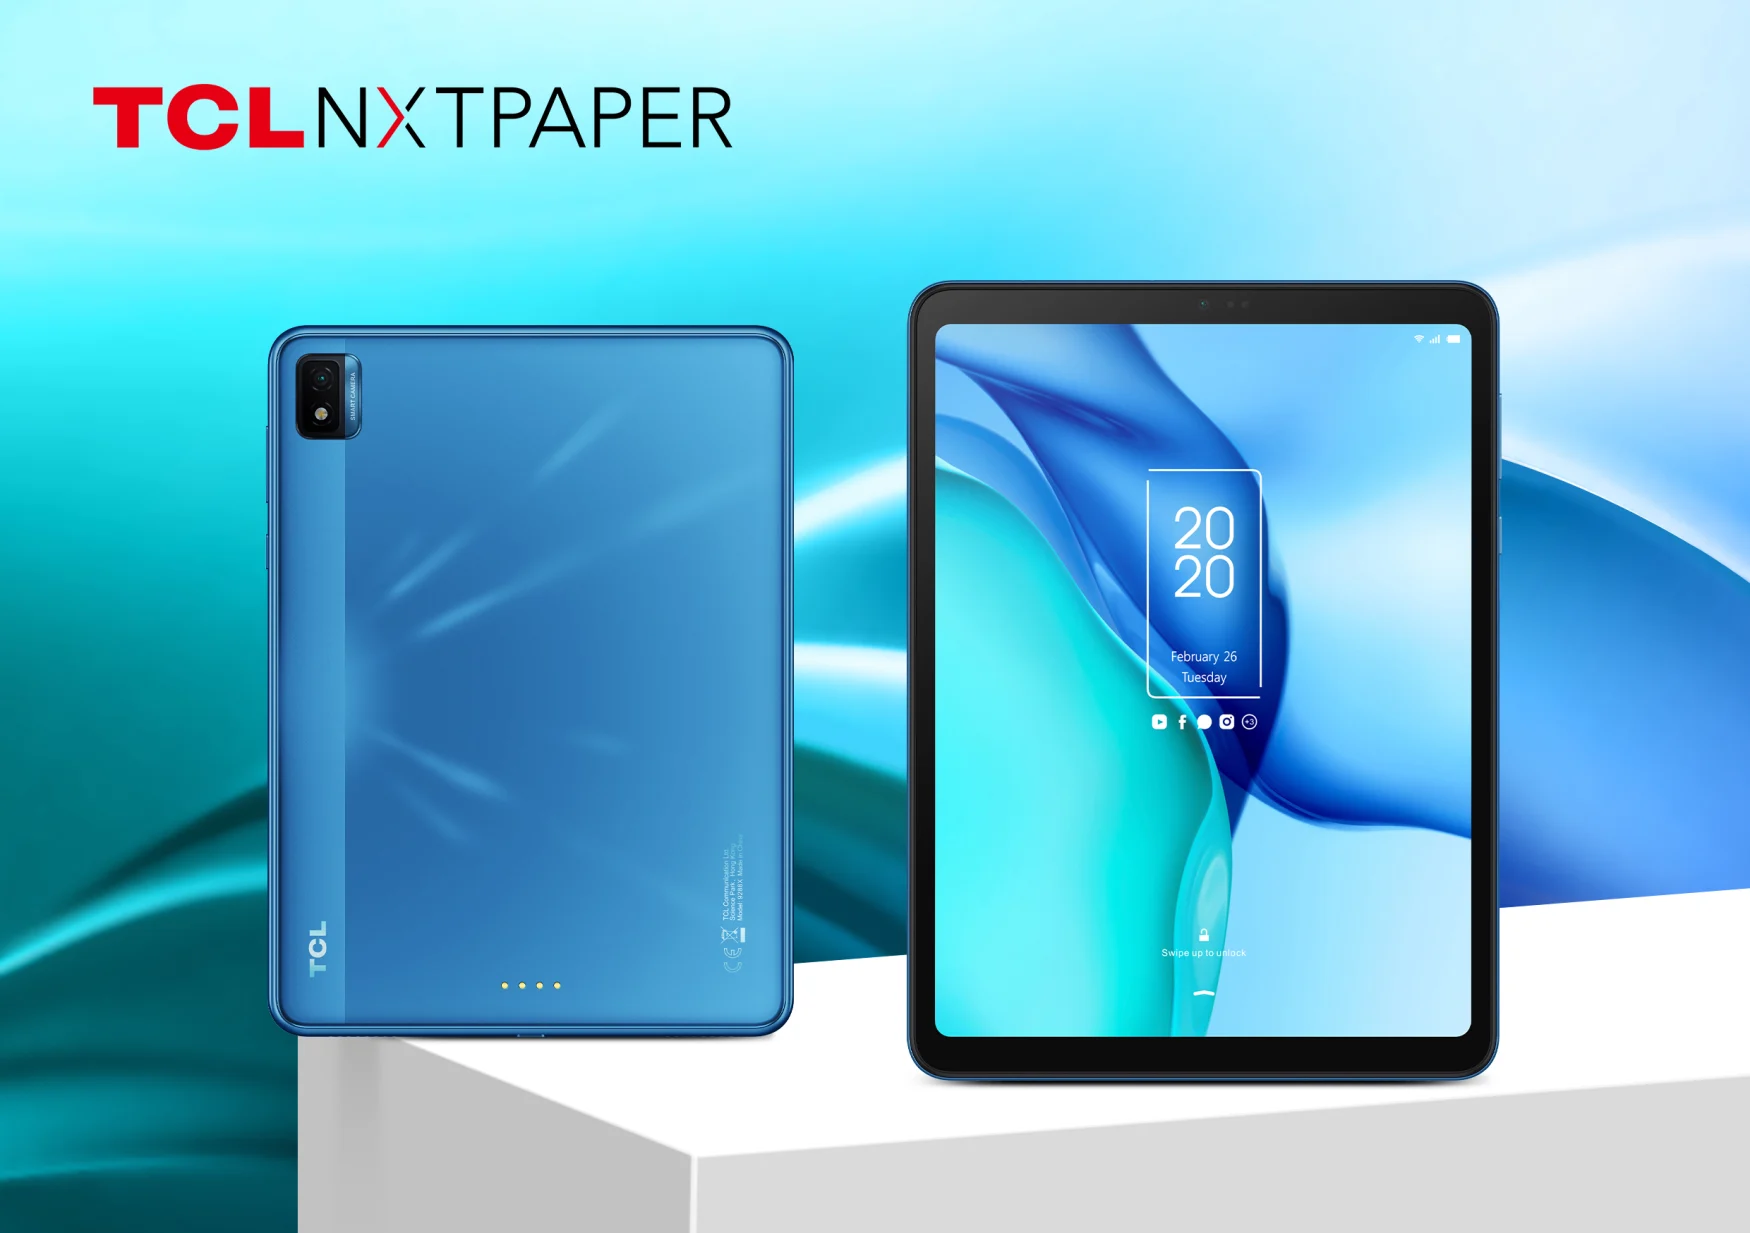 TCL NXTPAPER tablet at CES 2021